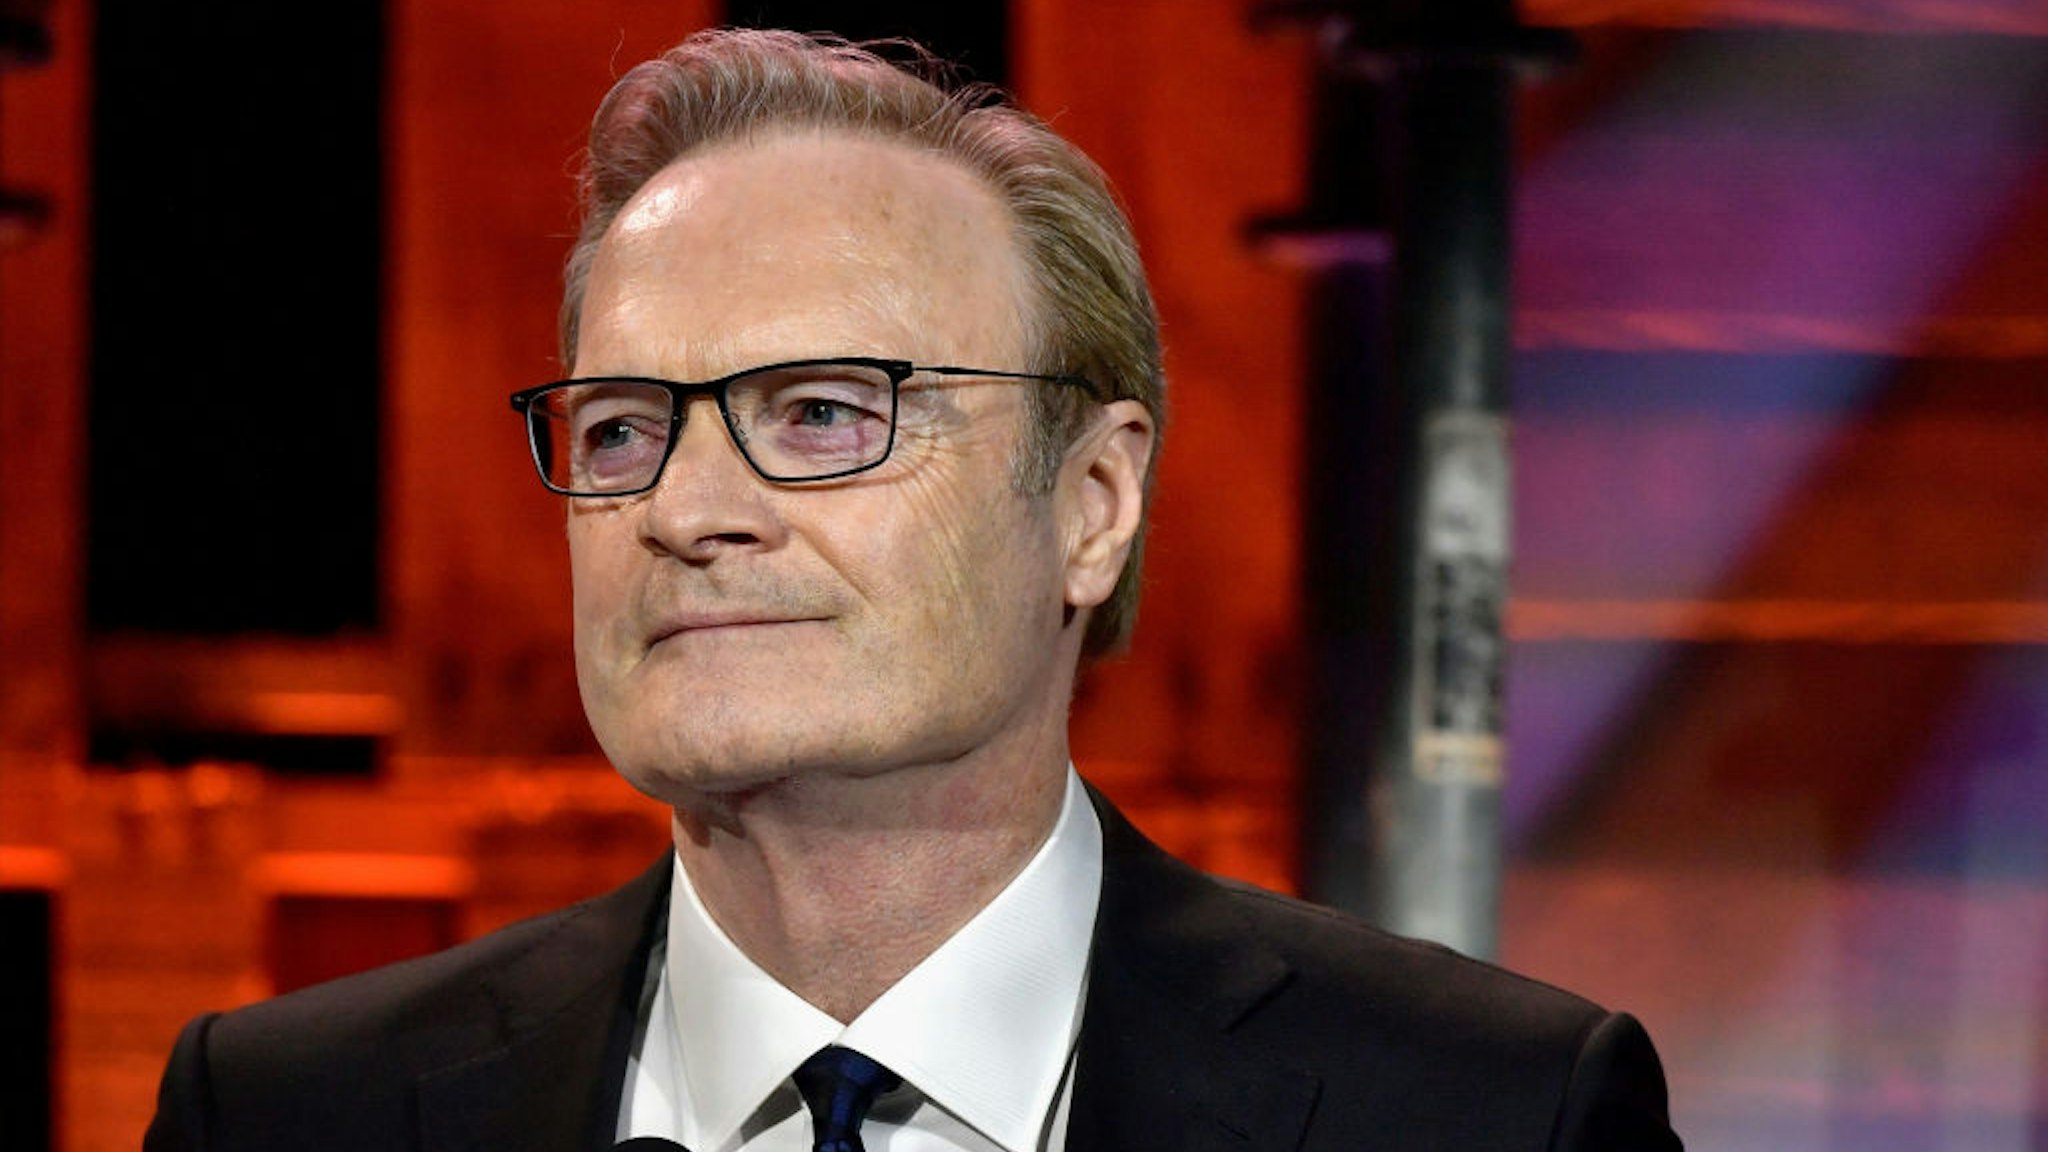 Lawrence O'Donnell, recipient of the 2018 UNICEF Children's Champion Award, speaks onstage during the Fourteenth Annual UNICEF Gala Boston 2018 on May 23, 2018 in Boston, Massachusetts.